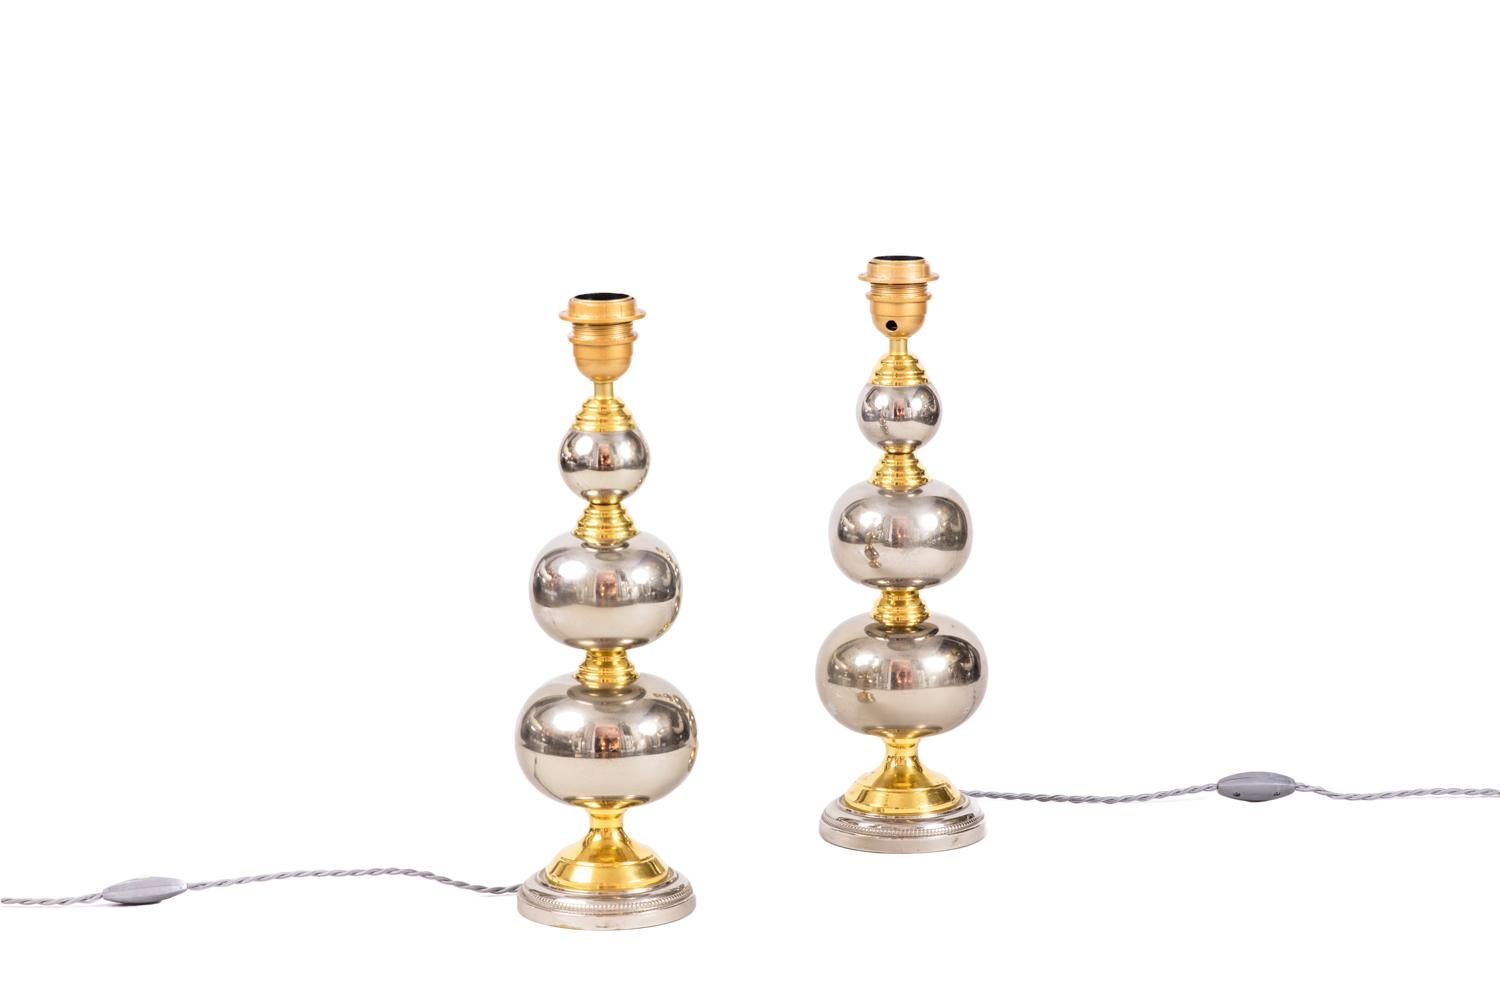 Pair of rosary lamps in chromed and gilt metal. Shaft in three chromed metal balls shape separated by gilt brass rings. The whole stands on a circular base adorned with a beads frieze.

Work realized in the 1970s.

New and functional electrical